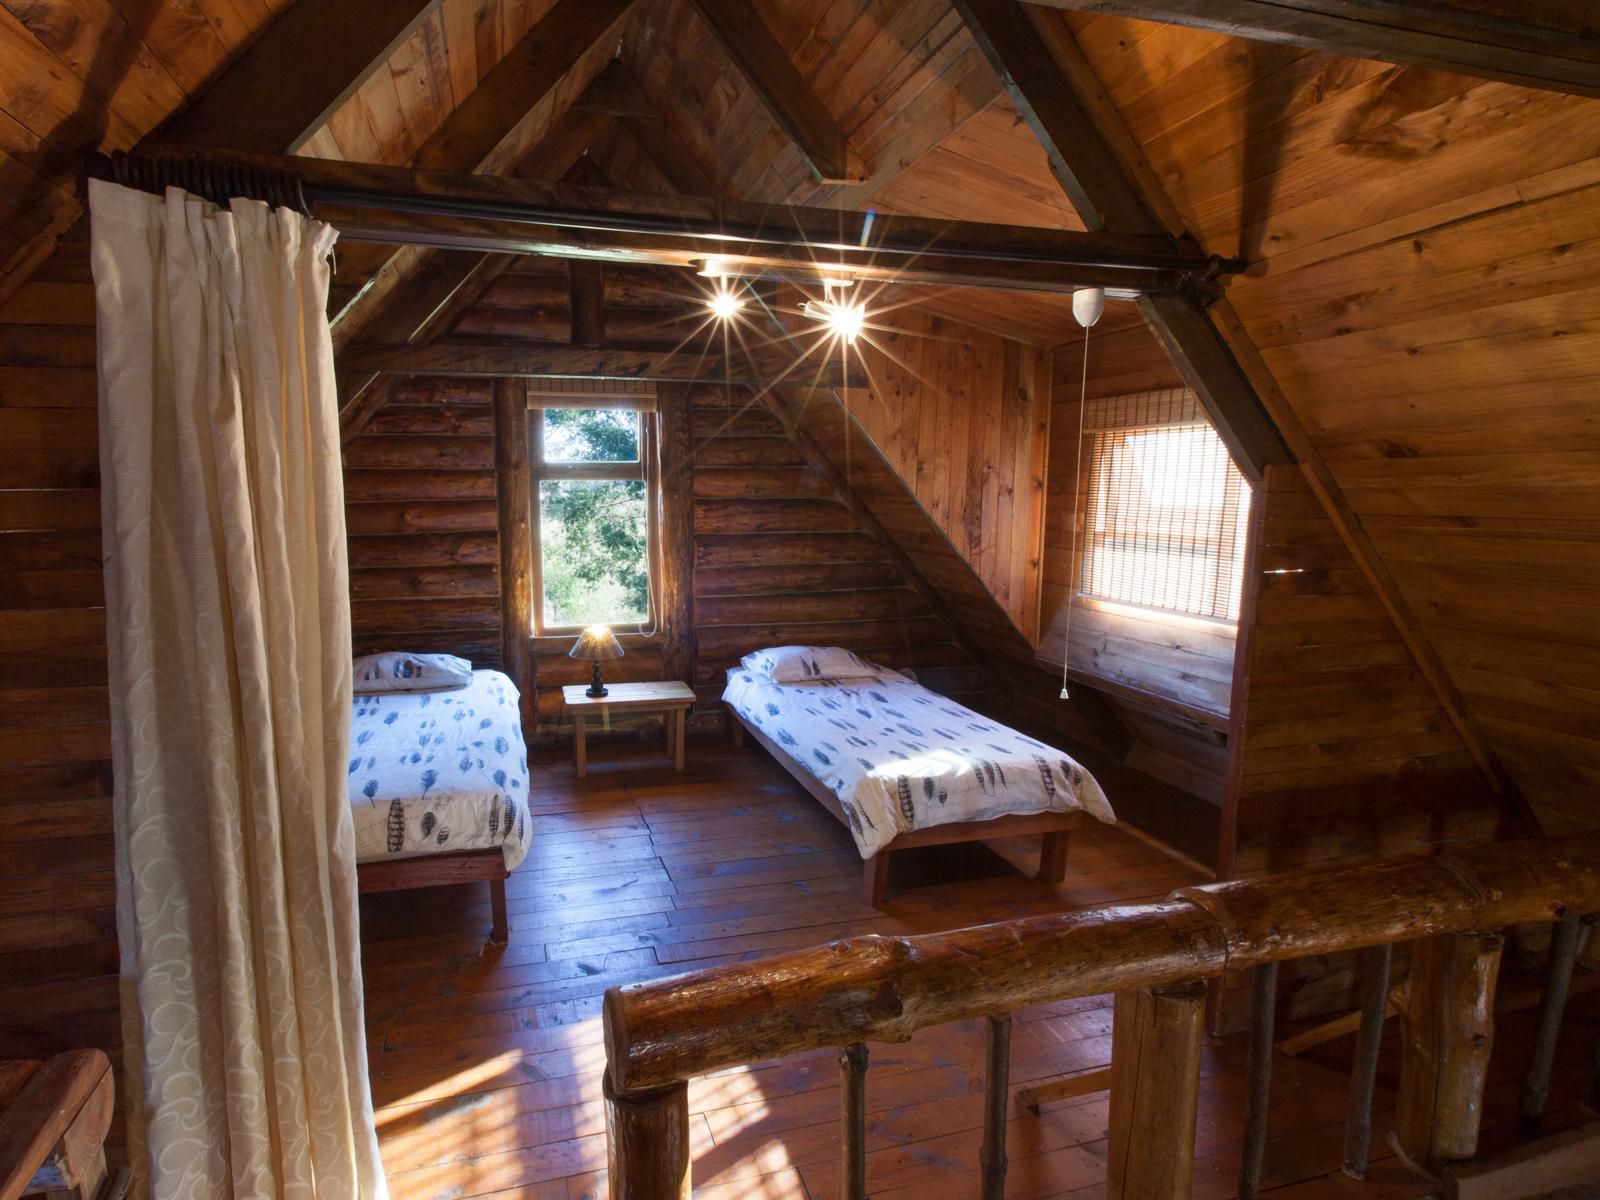 A Log Home Buffalo Creek Buffeljagsrivier Western Cape South Africa Cabin, Building, Architecture, Bedroom